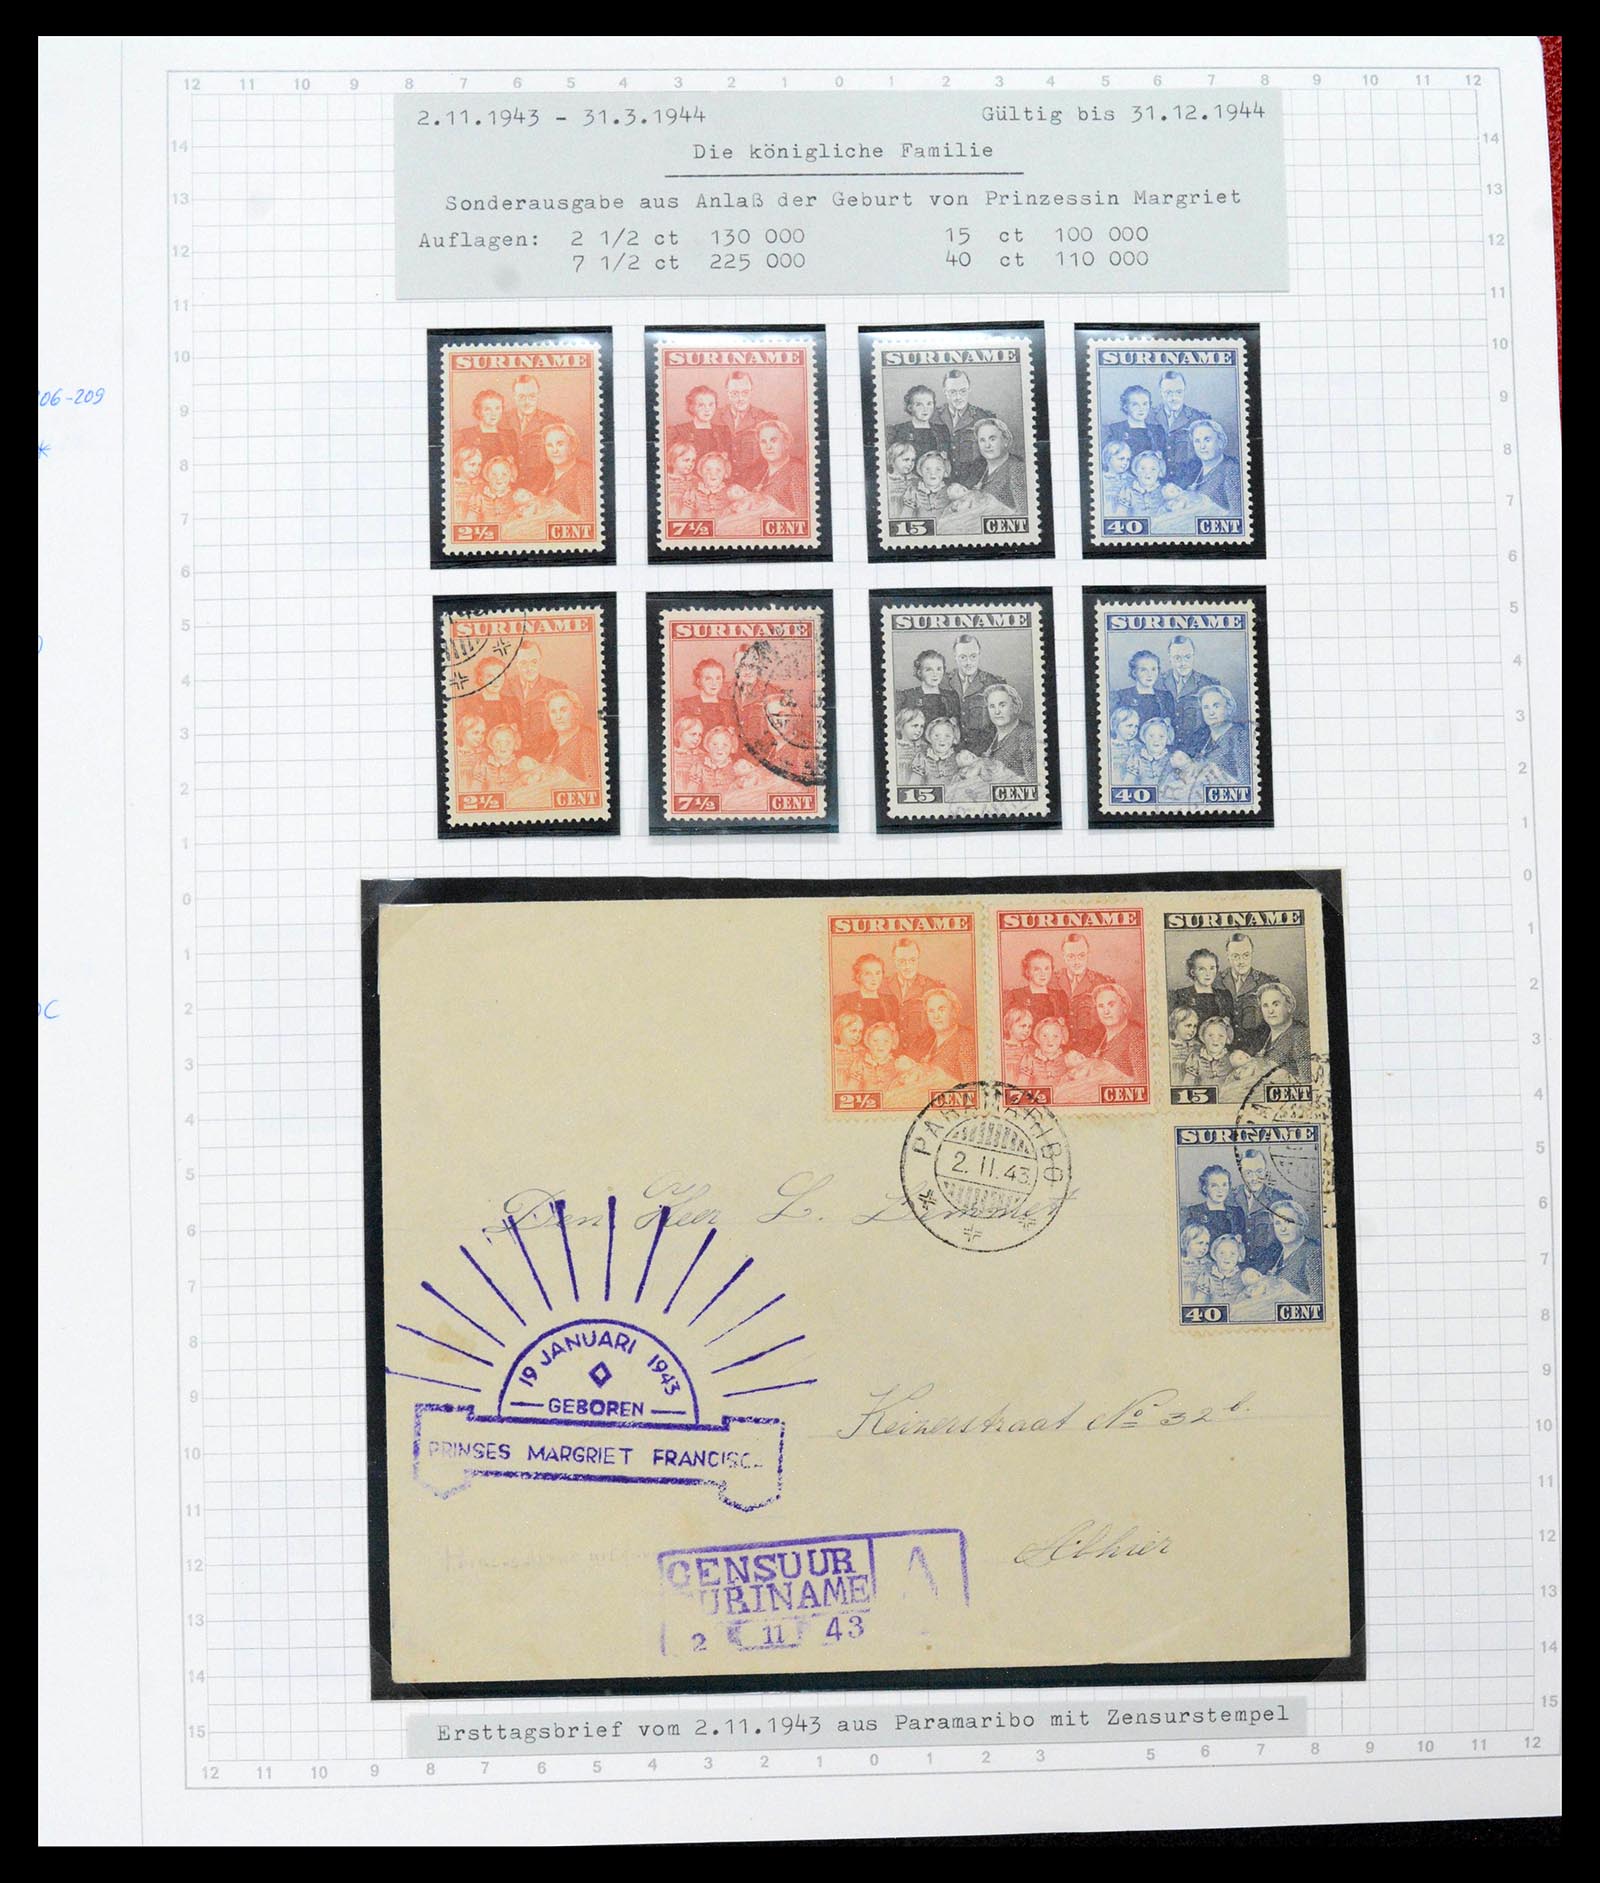 39373 0024 - Stamp collection 39373 Suriname 1873-1975.